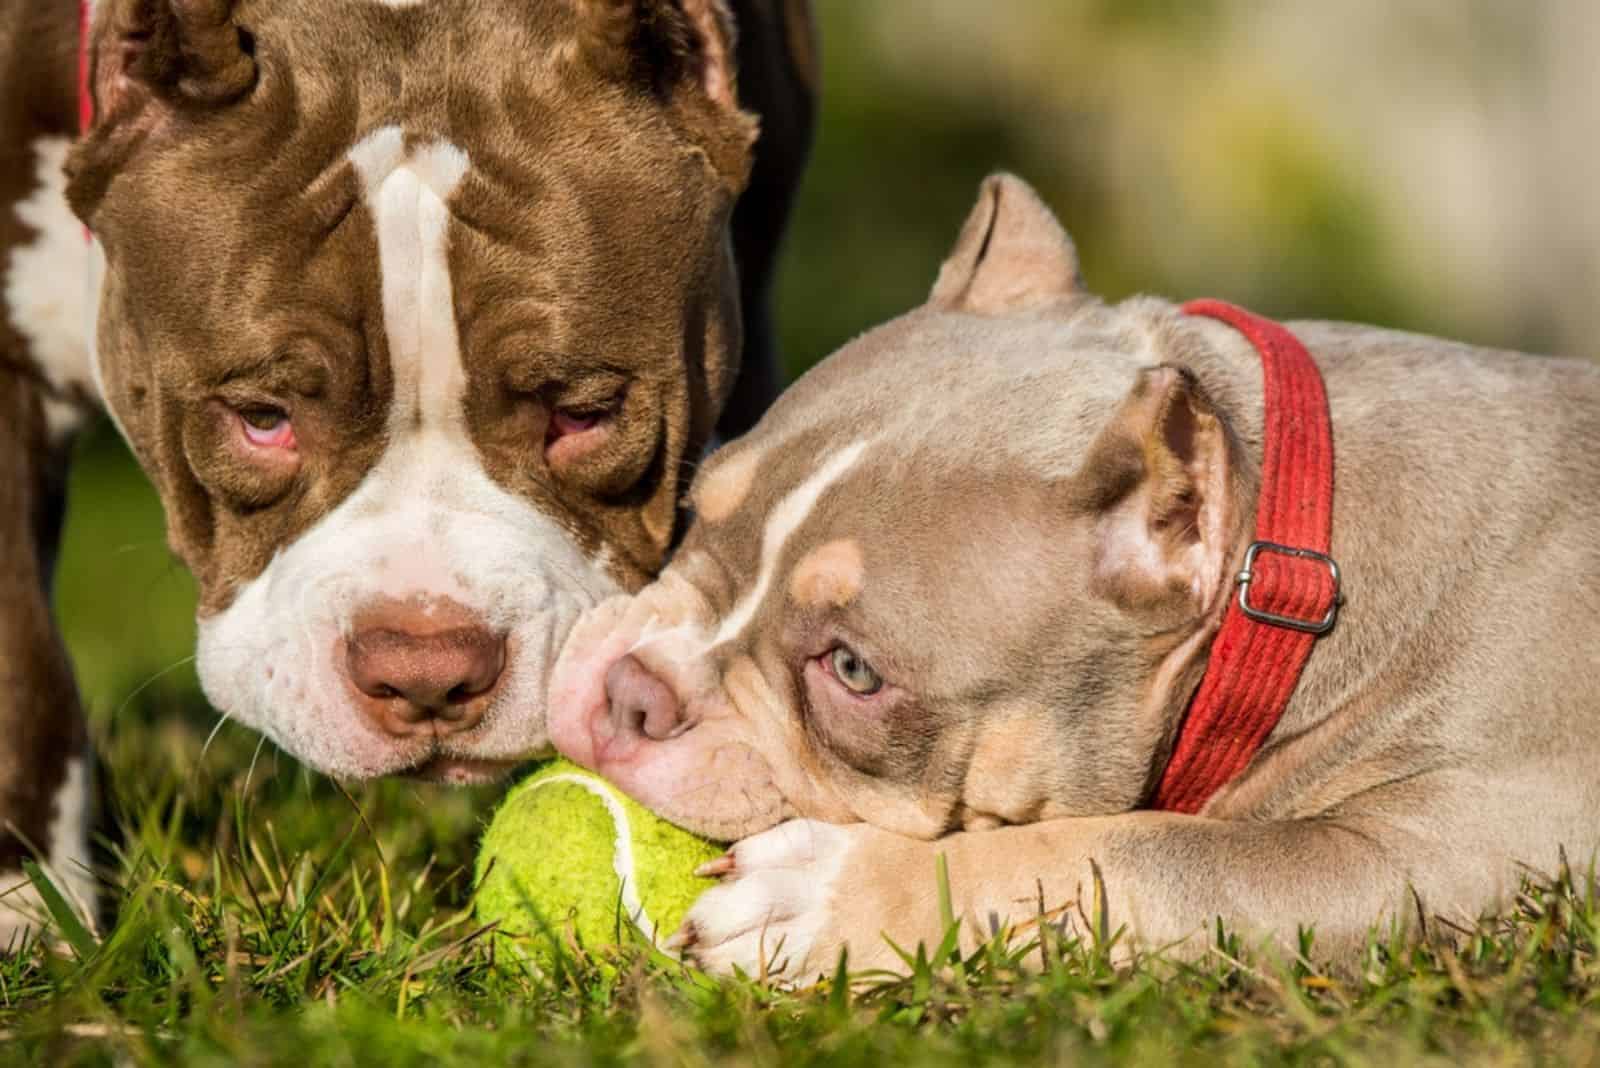 Two American Bully puppies dogs are playing with tennis ball on grass